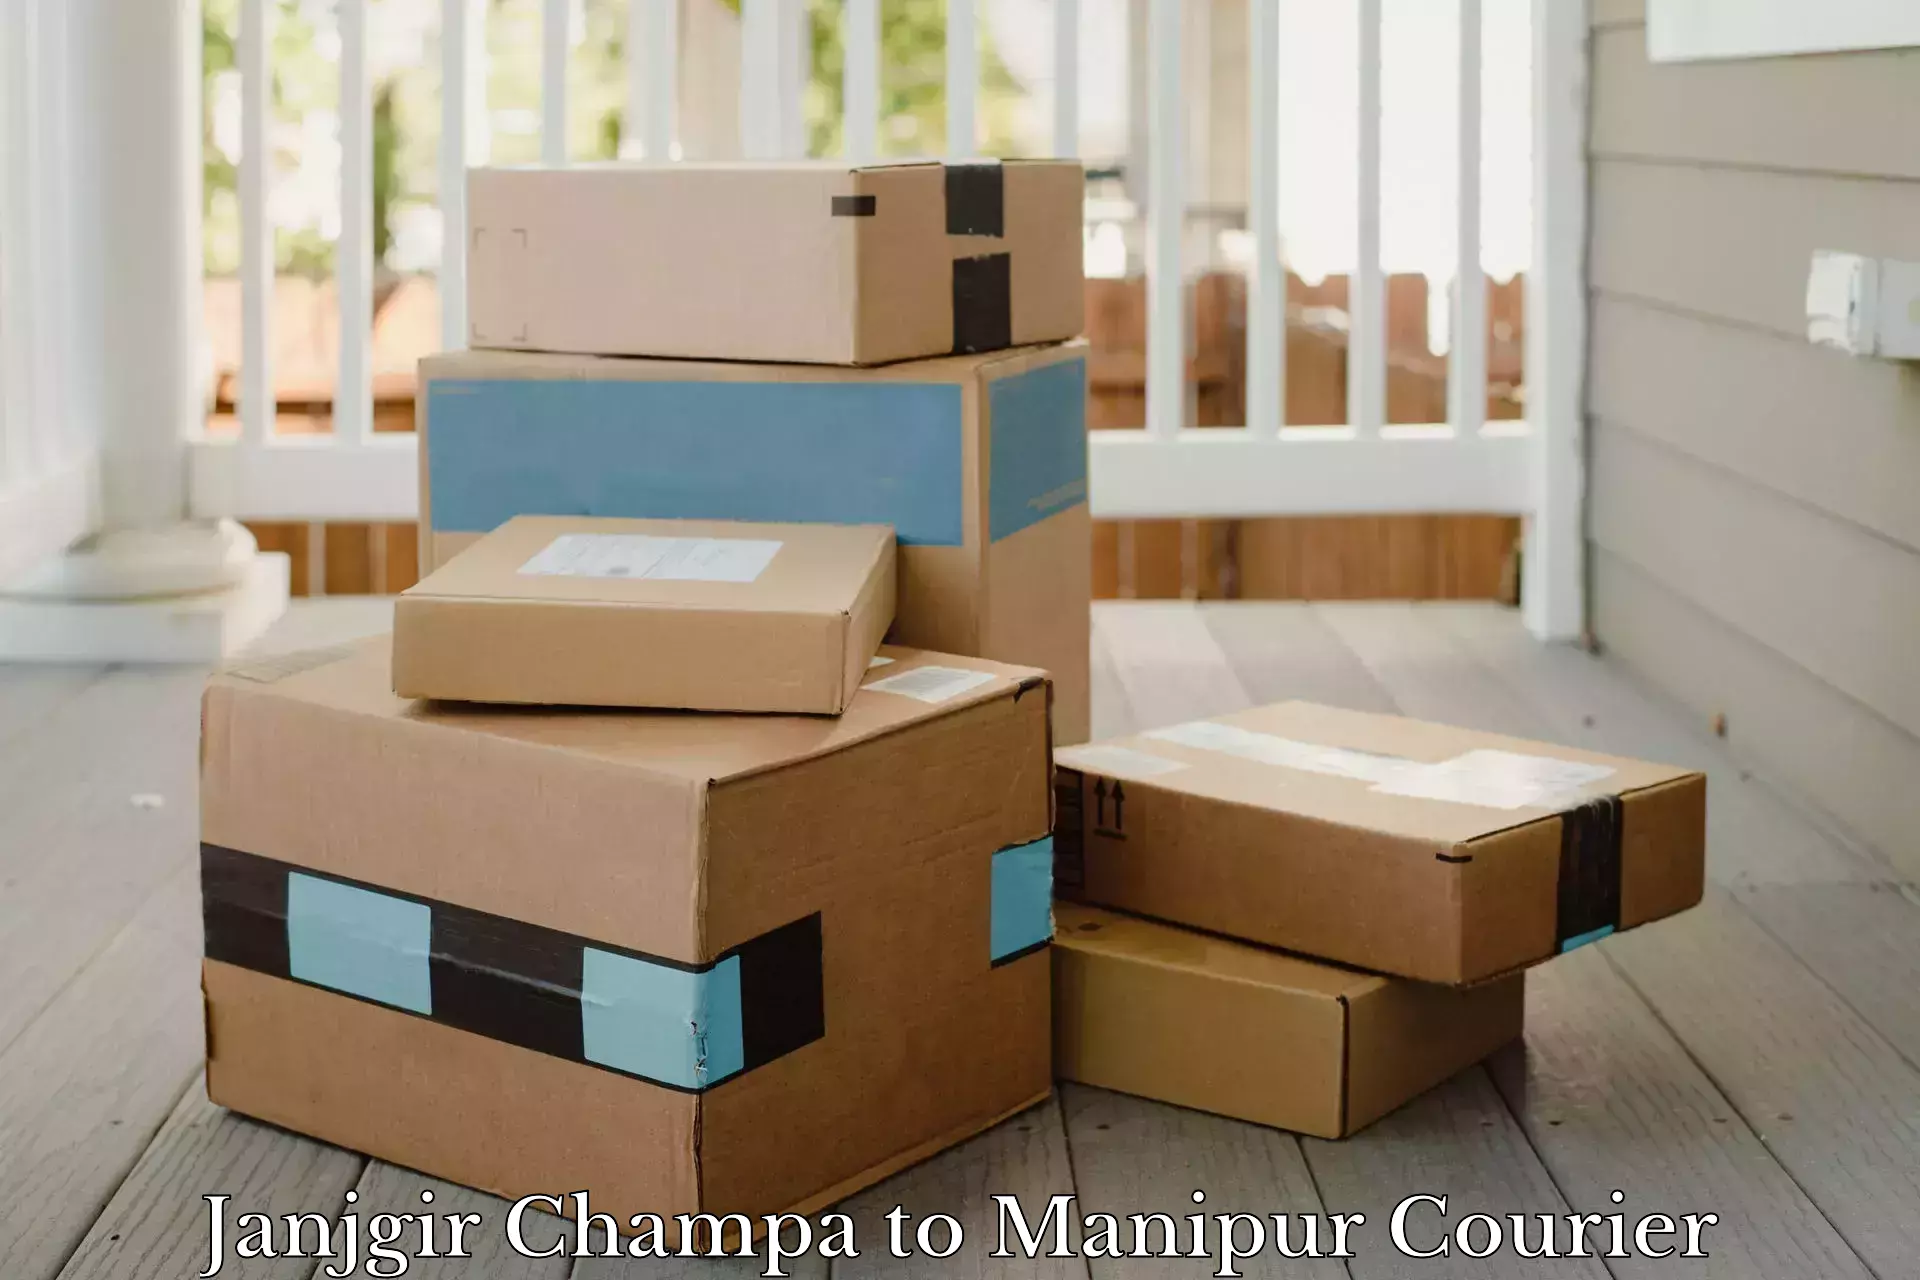 24-hour courier services Janjgir Champa to Manipur